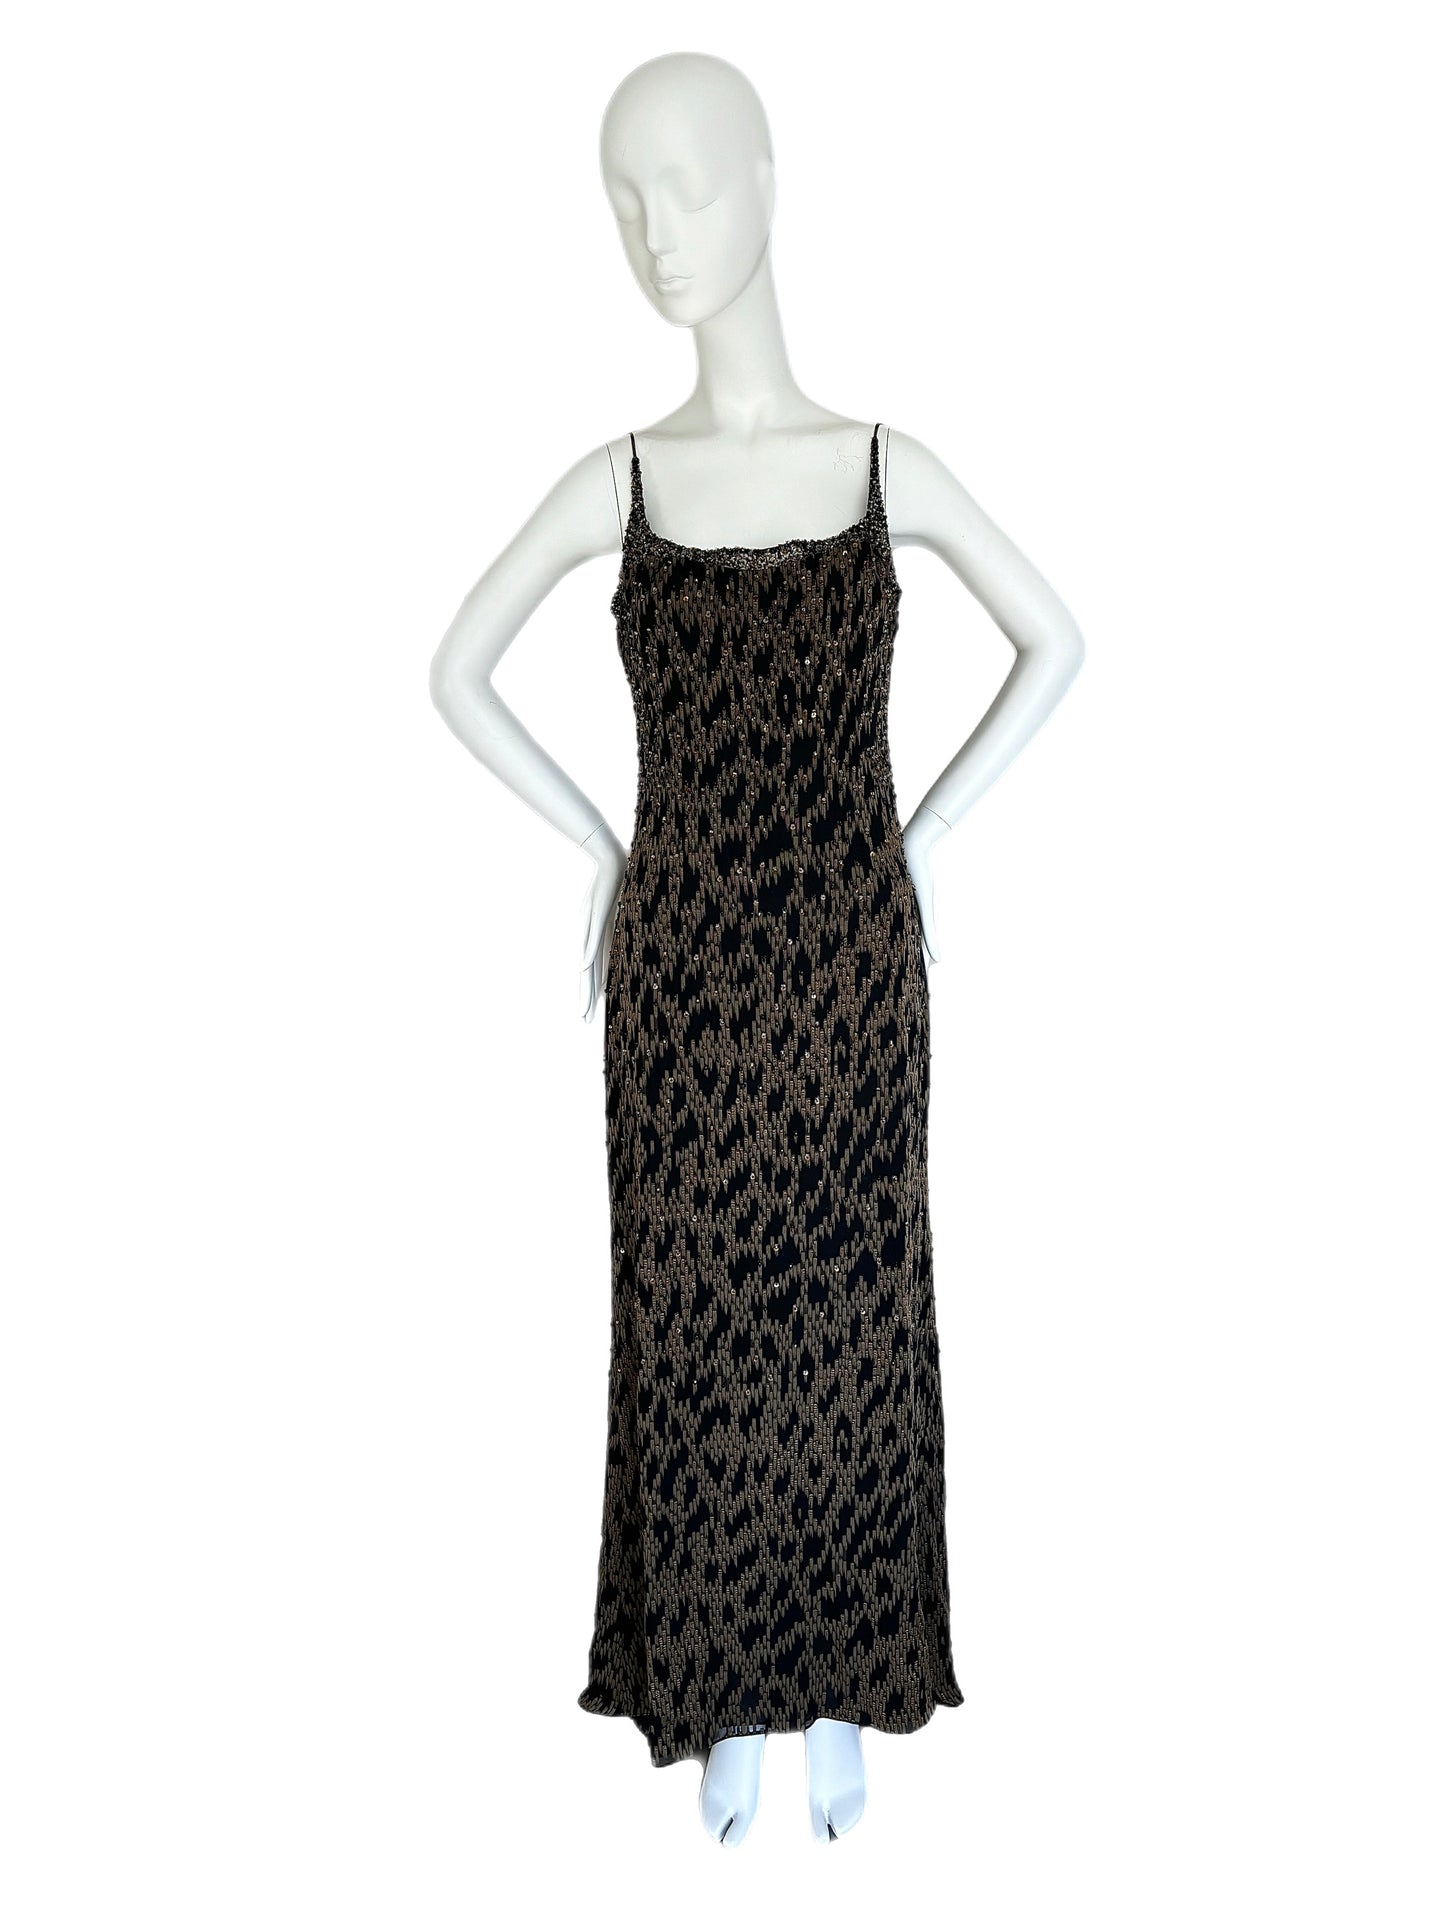 BADGLEY MISCHKA vintage black and gold embellished beaded evening gown maxi dress